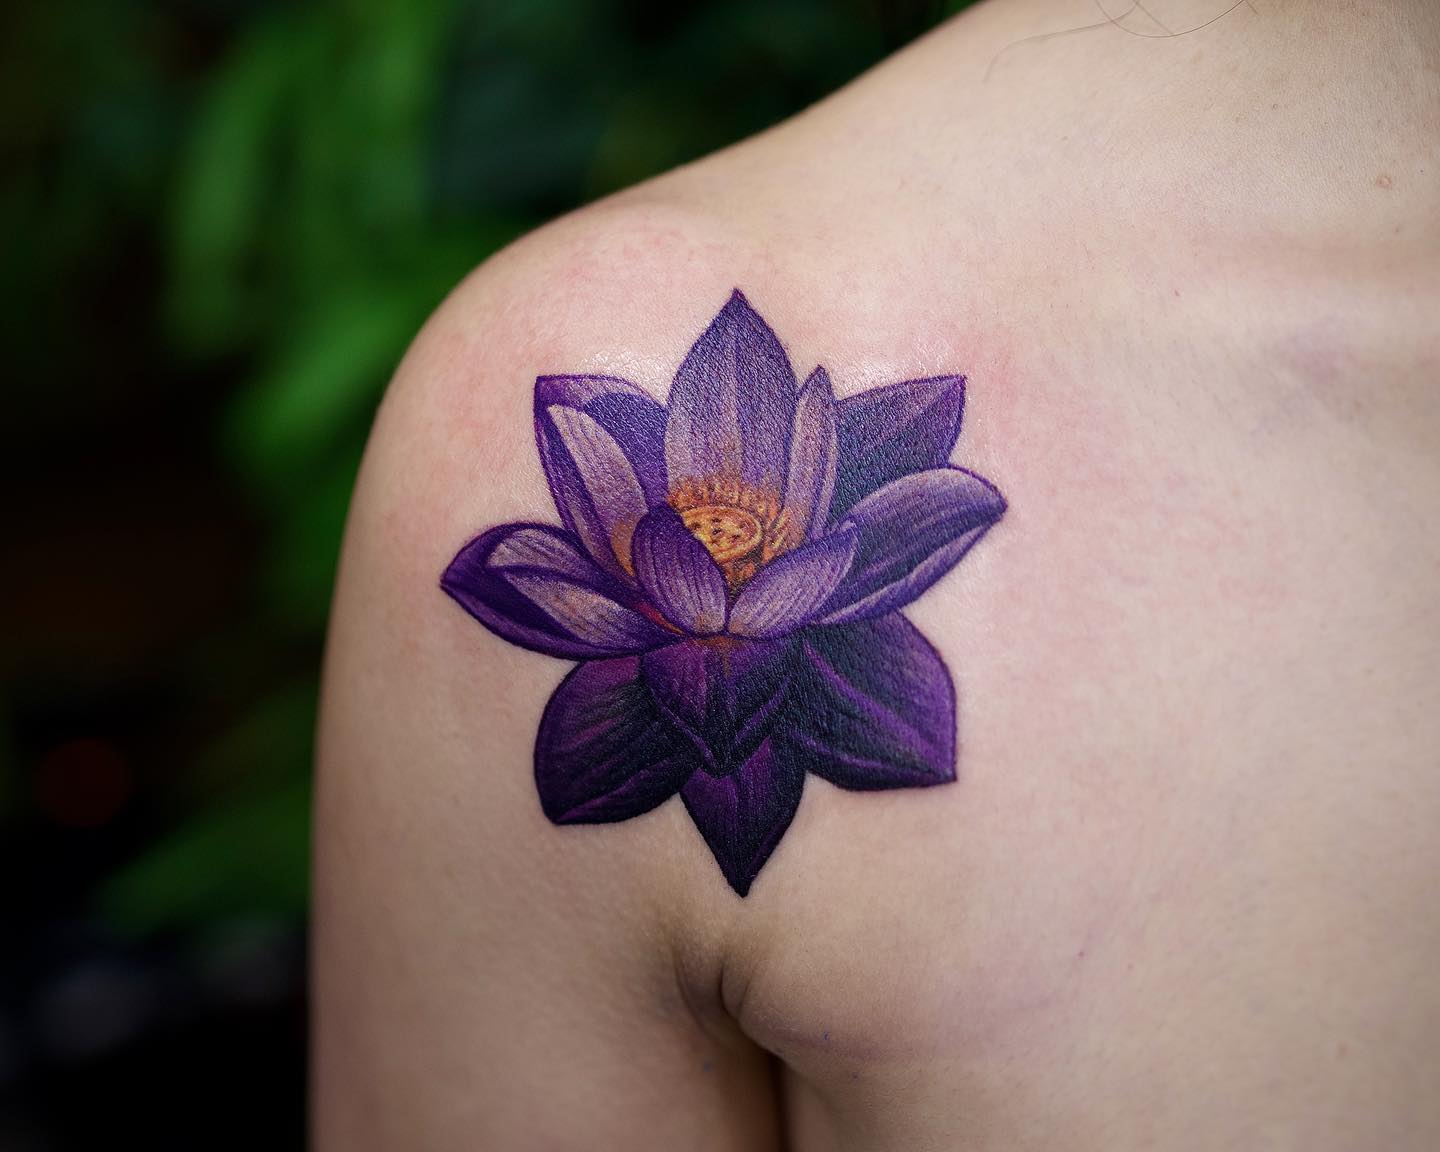 101 awesome black lotus tattoo designs you need to see  Black lotus tattoo  Lotus tattoo design Black flowers tattoo